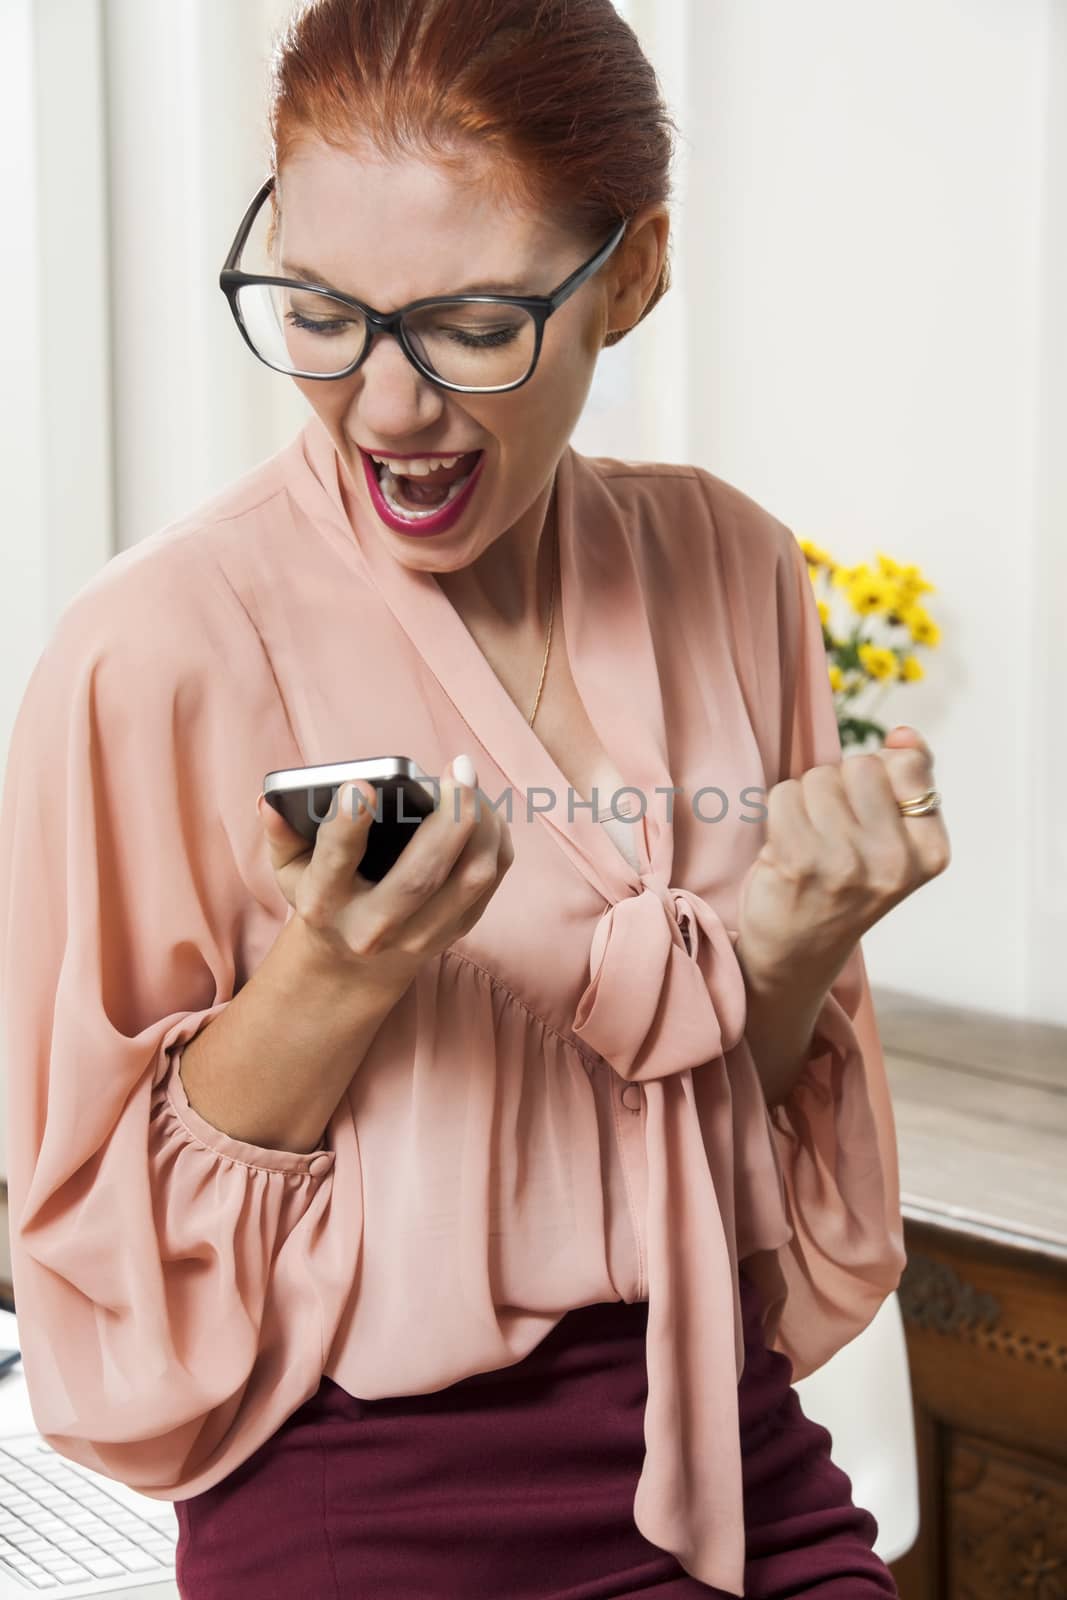 Young Serious Office Woman Talking to Someone Though Mobile Phone While Sitting on the Table.